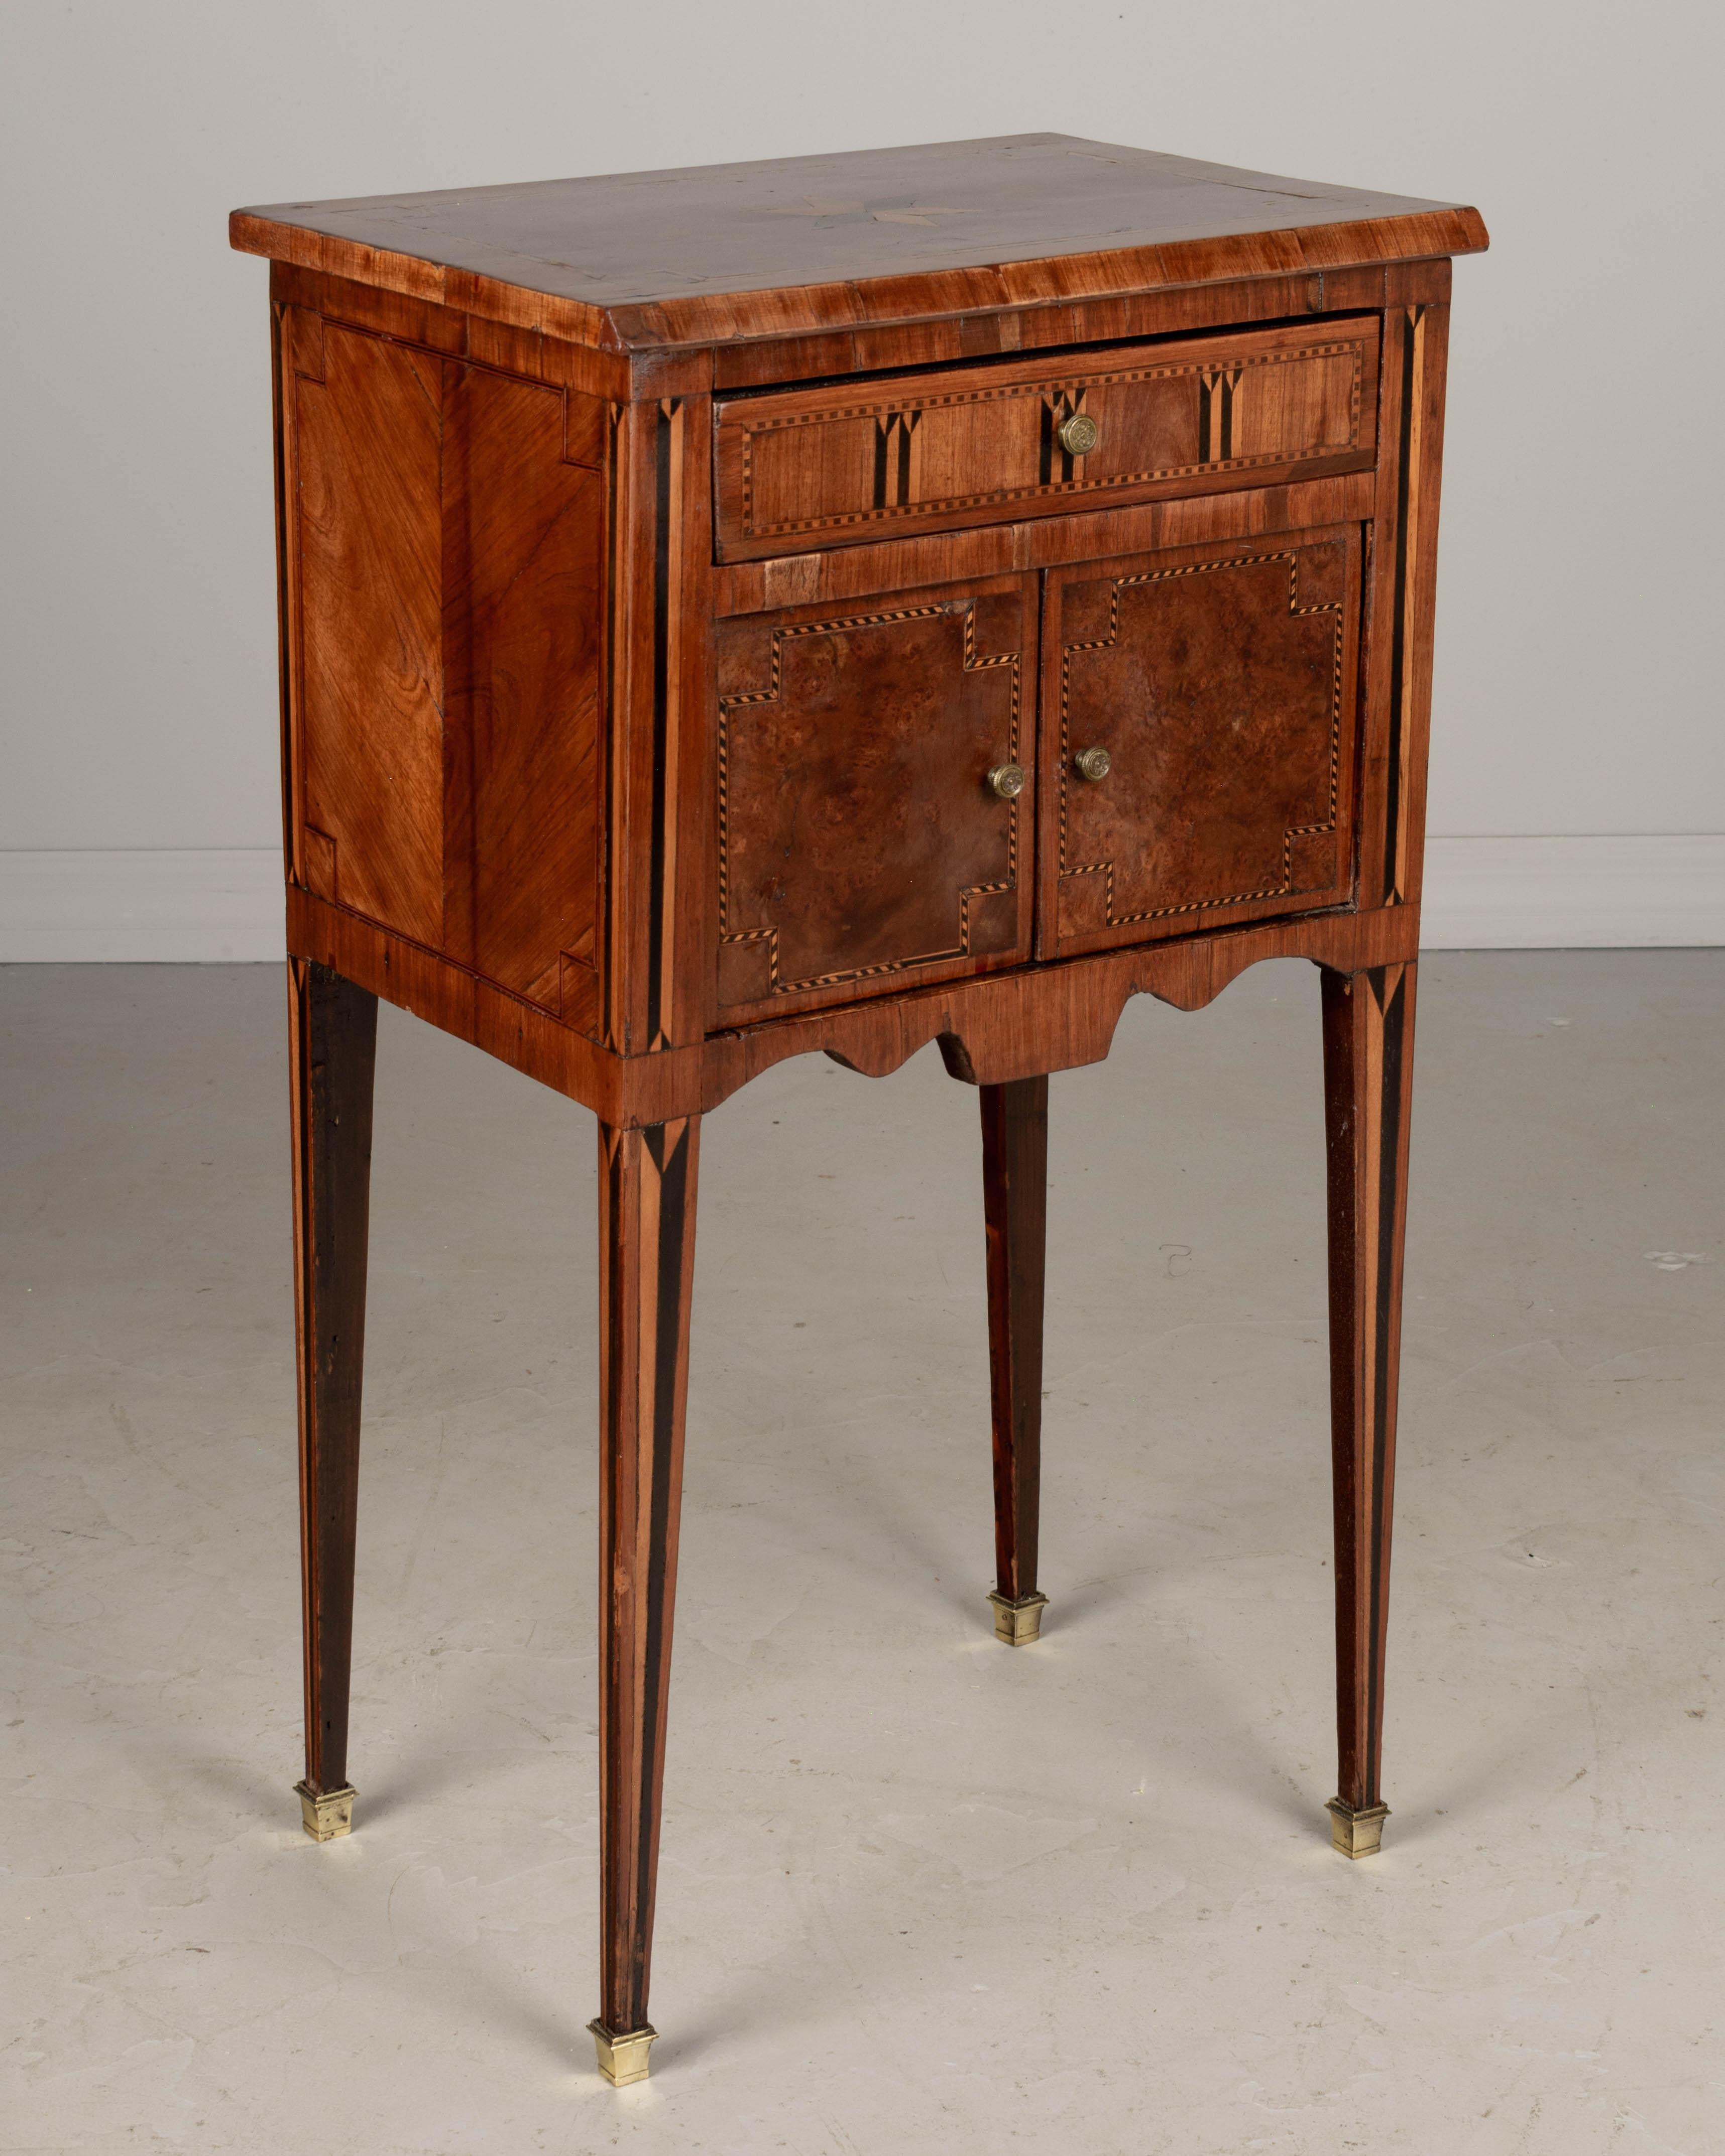 A late 18th century French Louis XVI style marquetry side table, or nightstand, with one drawer above cabinet doors. Made of inlaid veneers of mahogany, walnut and elmwood. Slender tapered legs with marquetry detail and brass sabots. Good